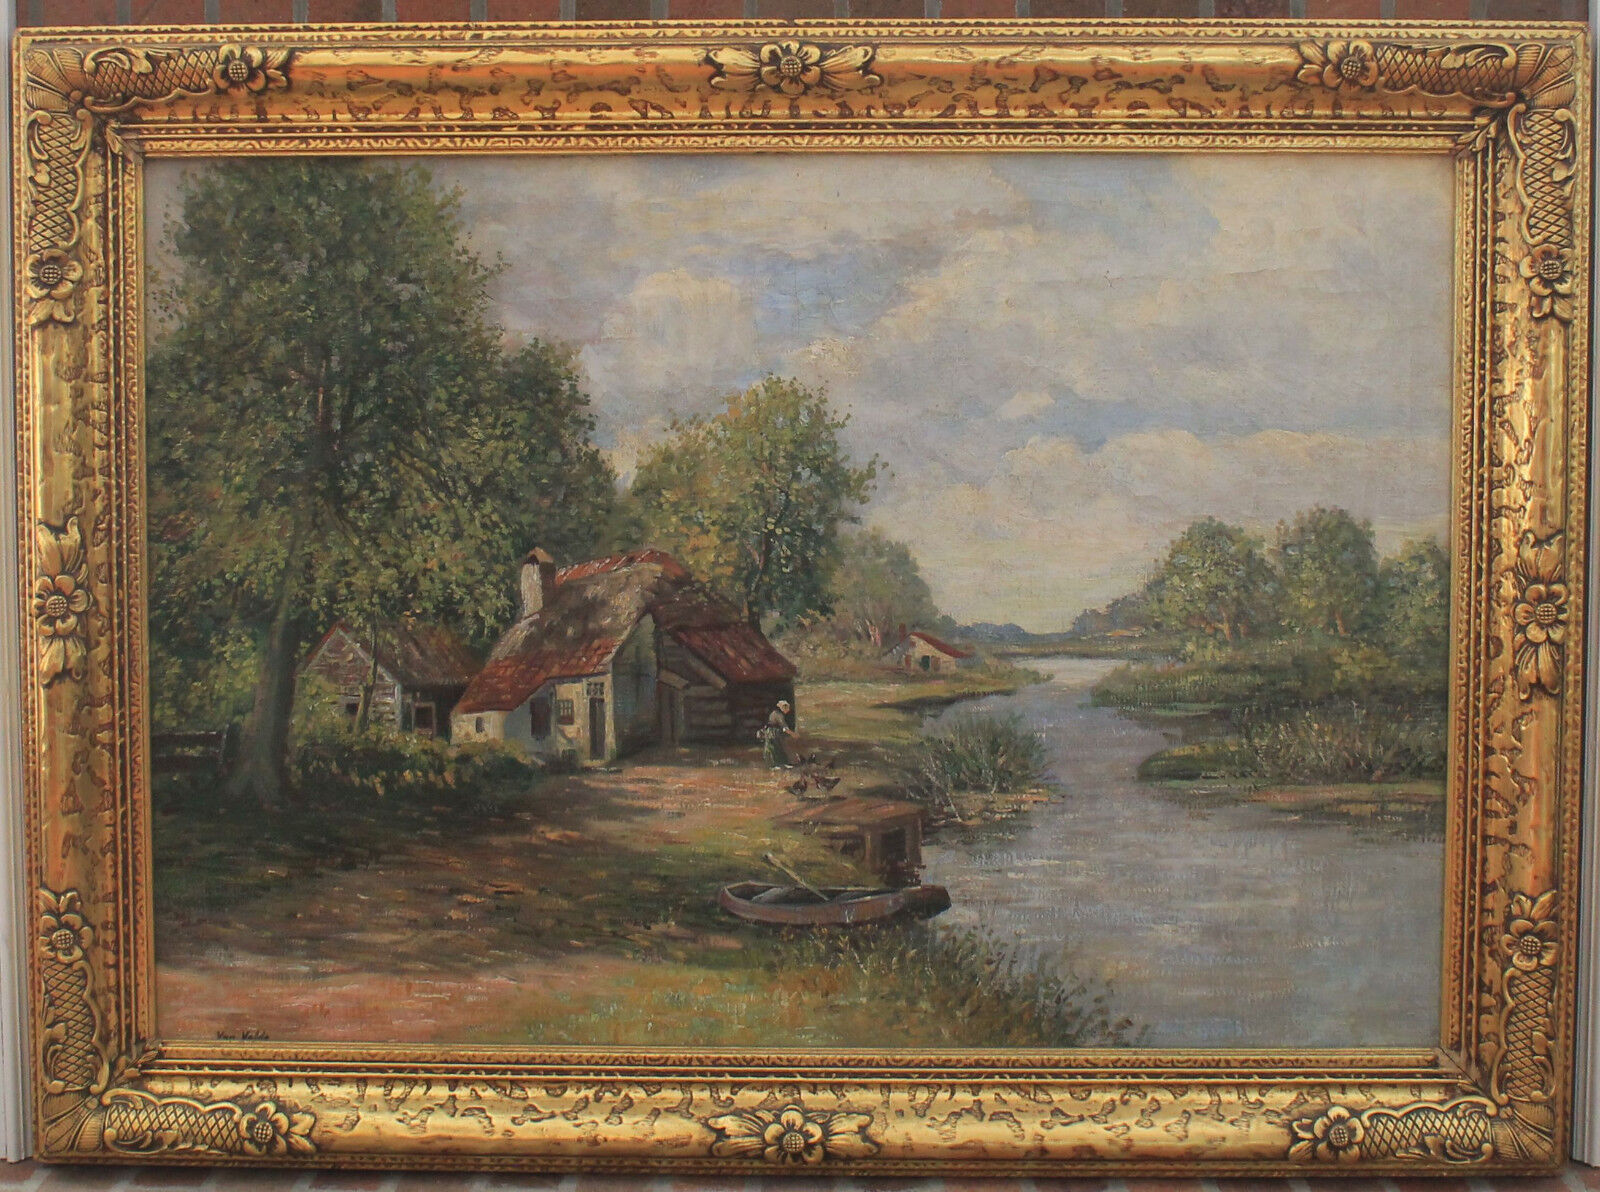 Van Velde Signed Oil on Canvas - Late 19th/Early 20th Century in Ornate Frame  